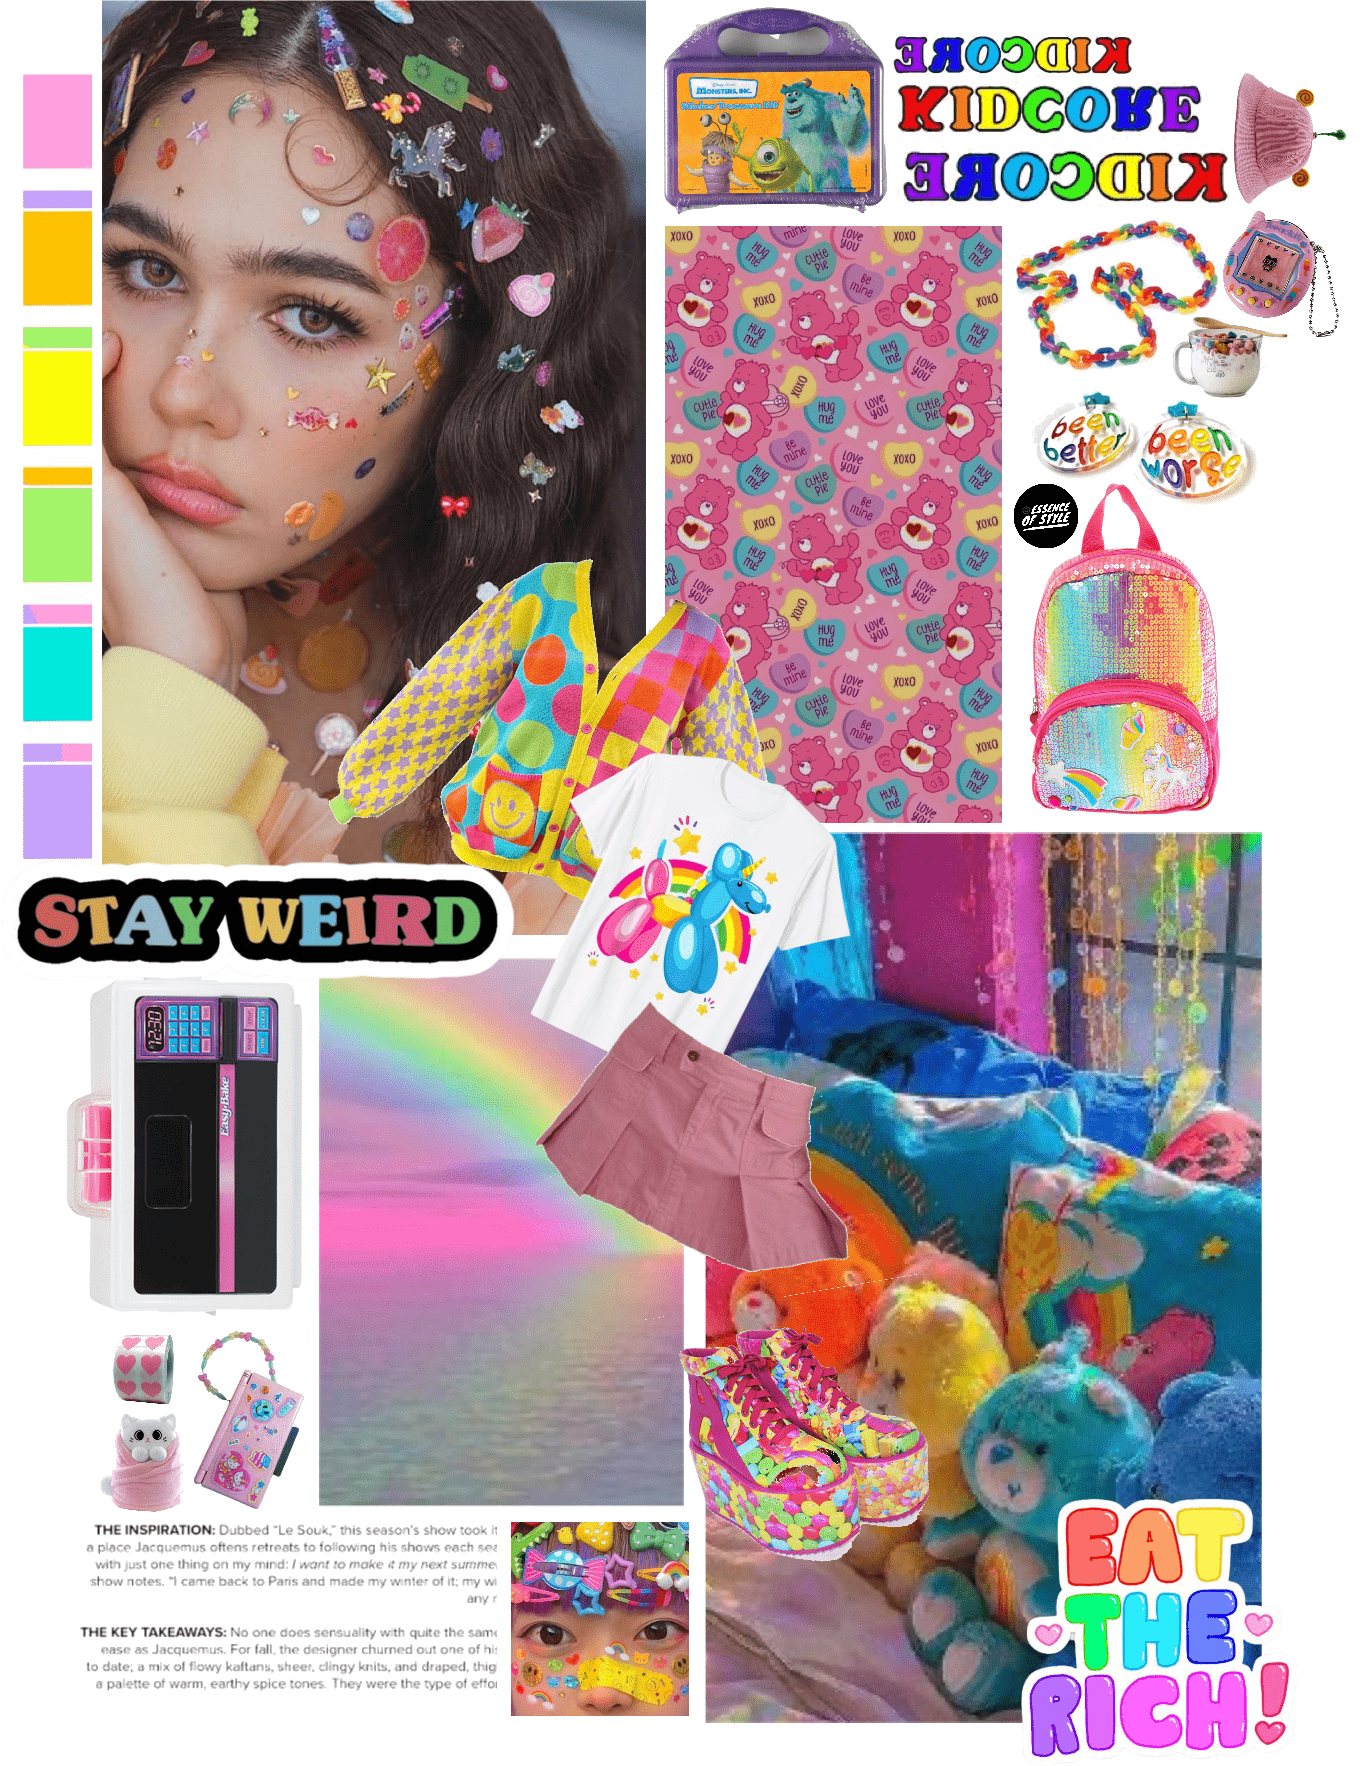 A collage of images including a girl with stickers on her face, a backpack, and stationary. - Kidcore